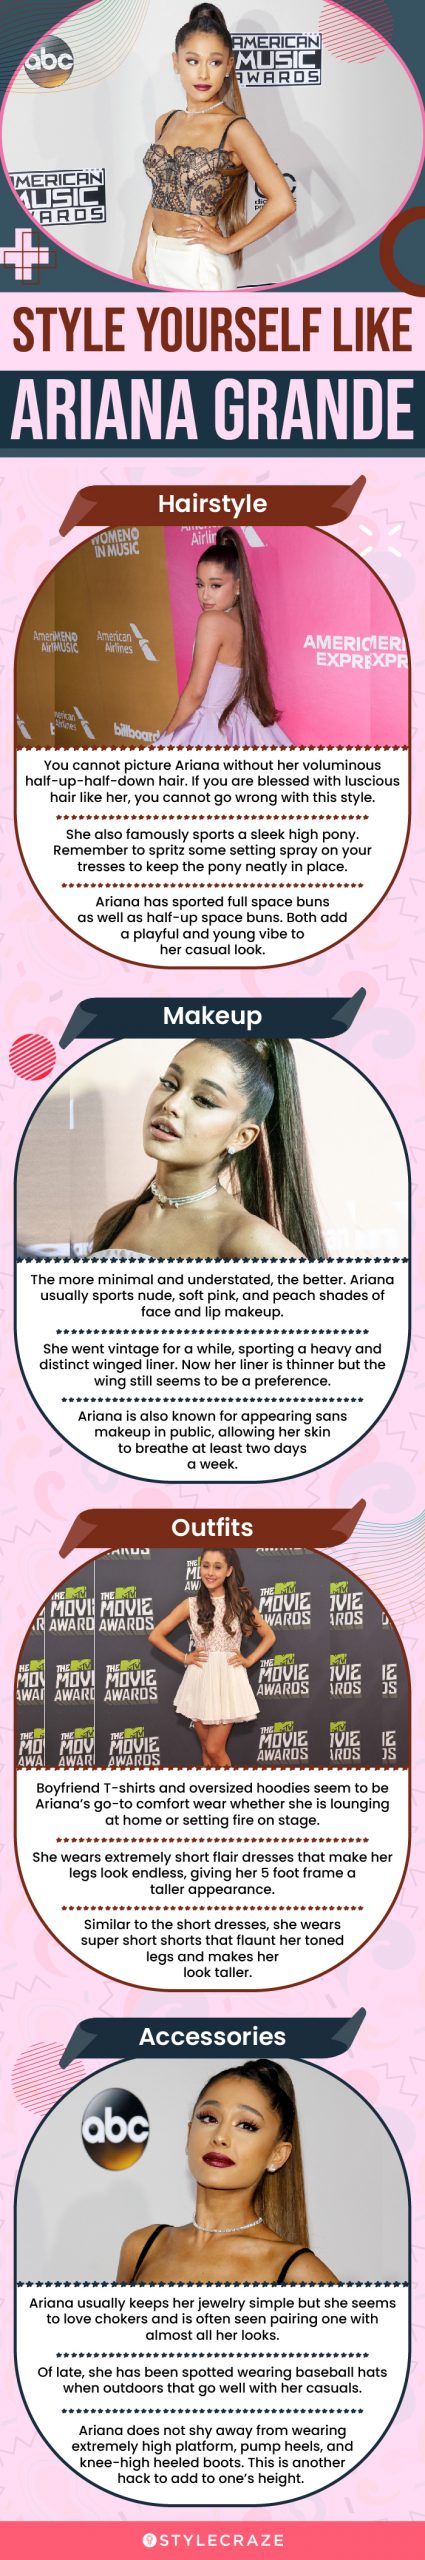 style yourself like ariana grande (infographic)